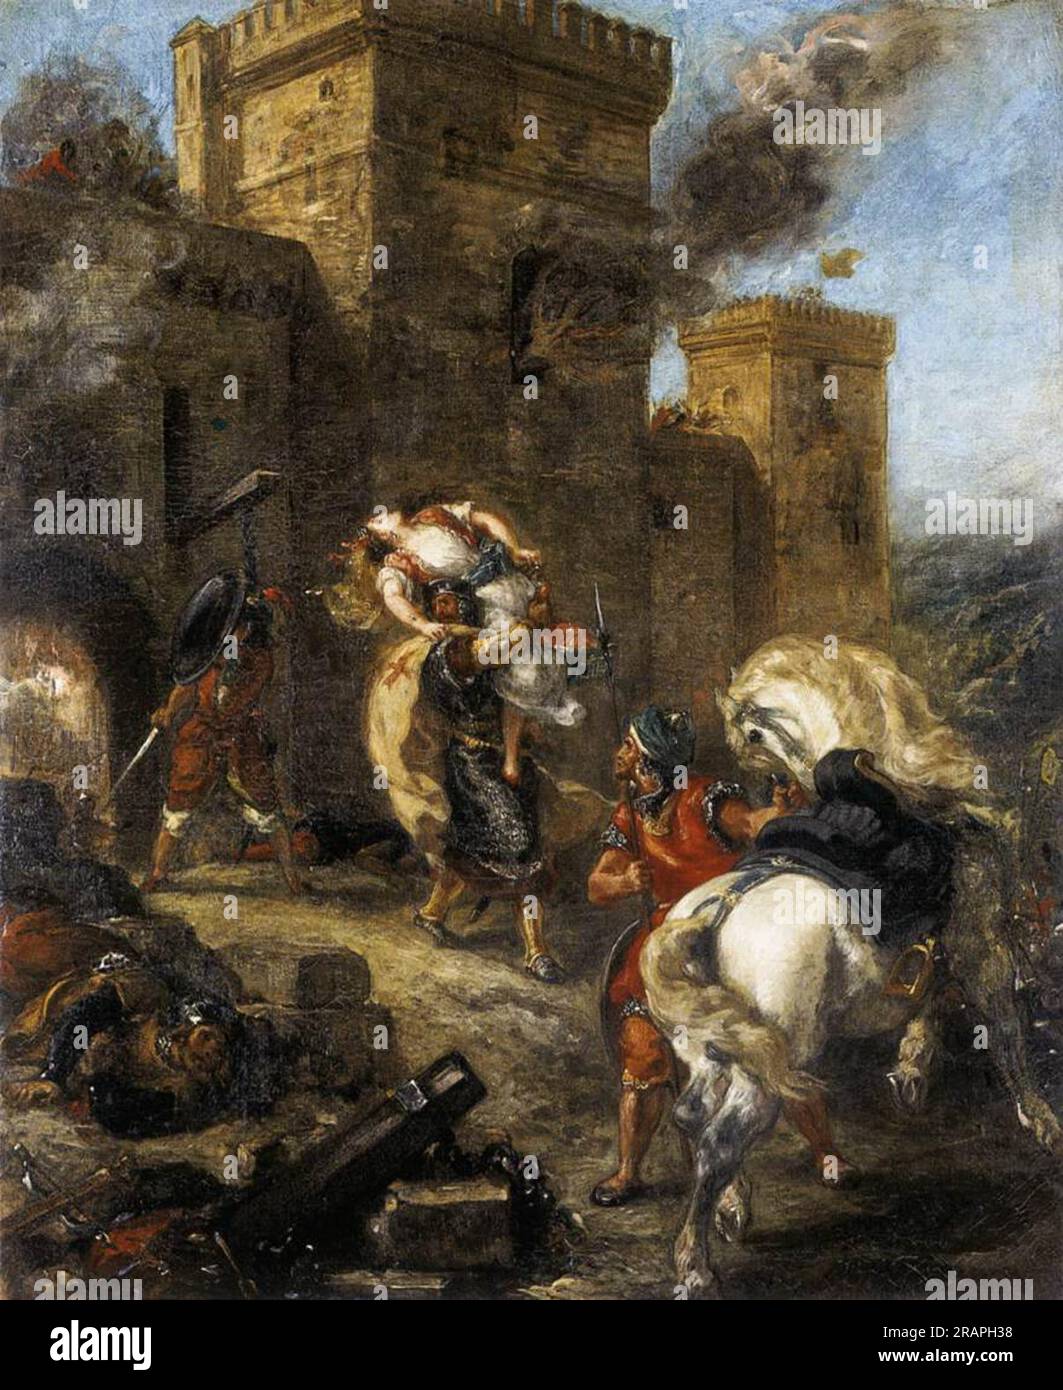 Rebecca Kidnapped by the Templar, Sir Brian de Bois-Guilbert 1858 by Eugene Delacroix Stock Photo